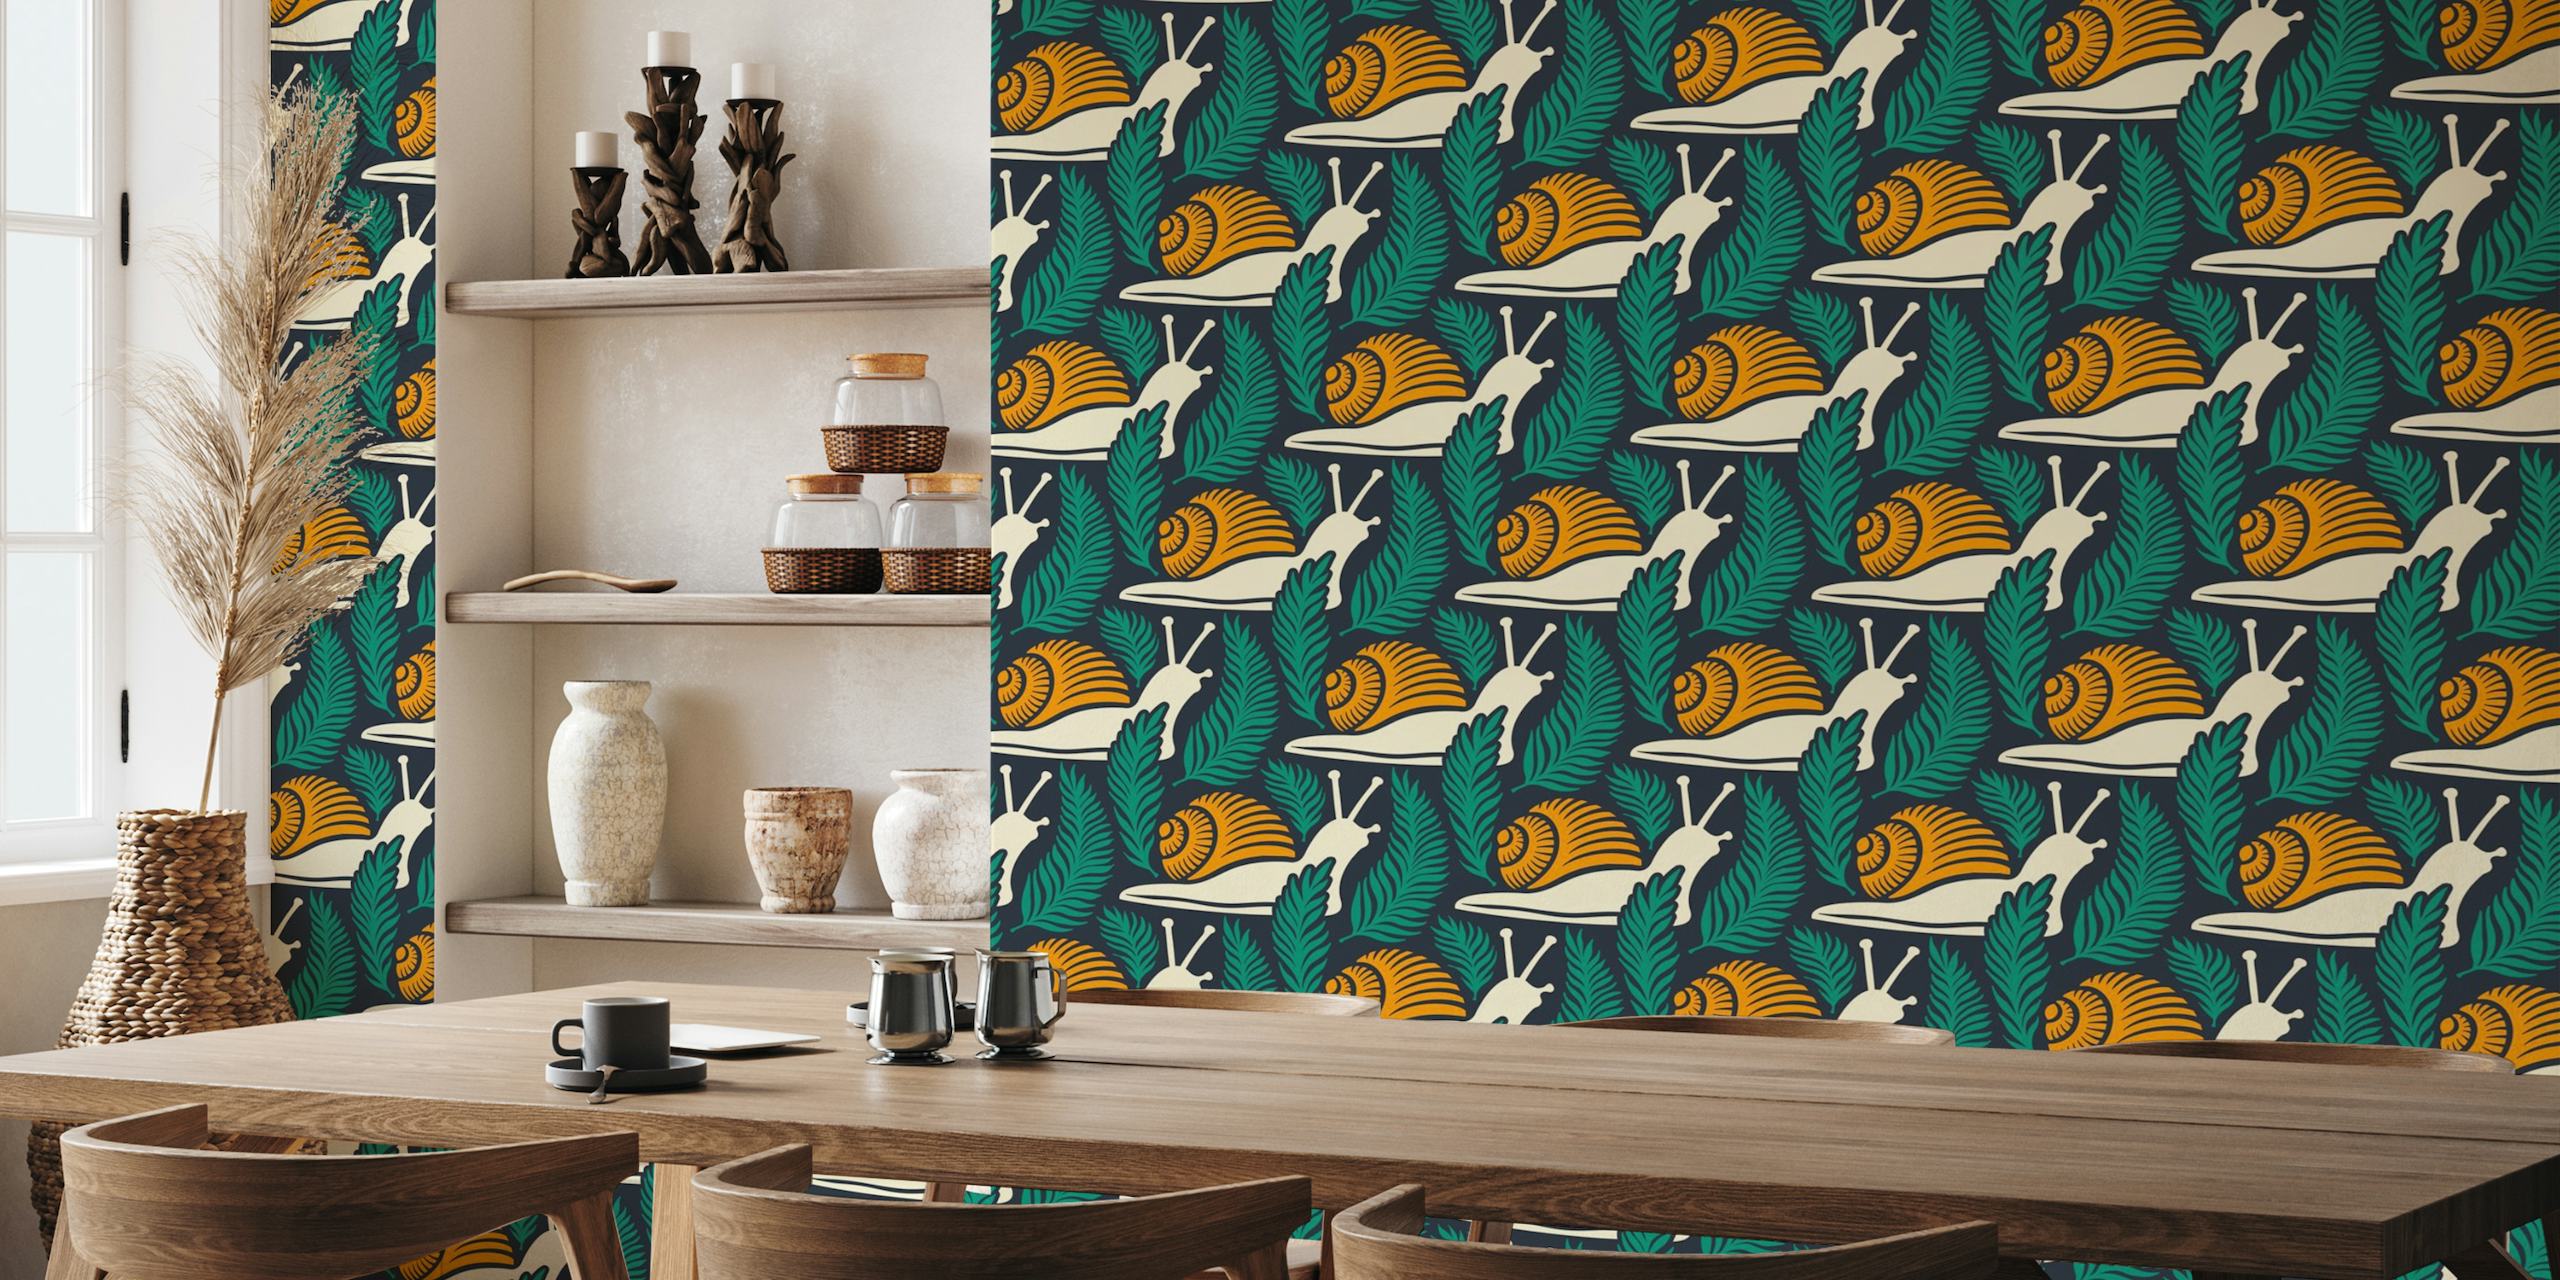 Snails in ferns, teal yellow / 3001 A tapeta